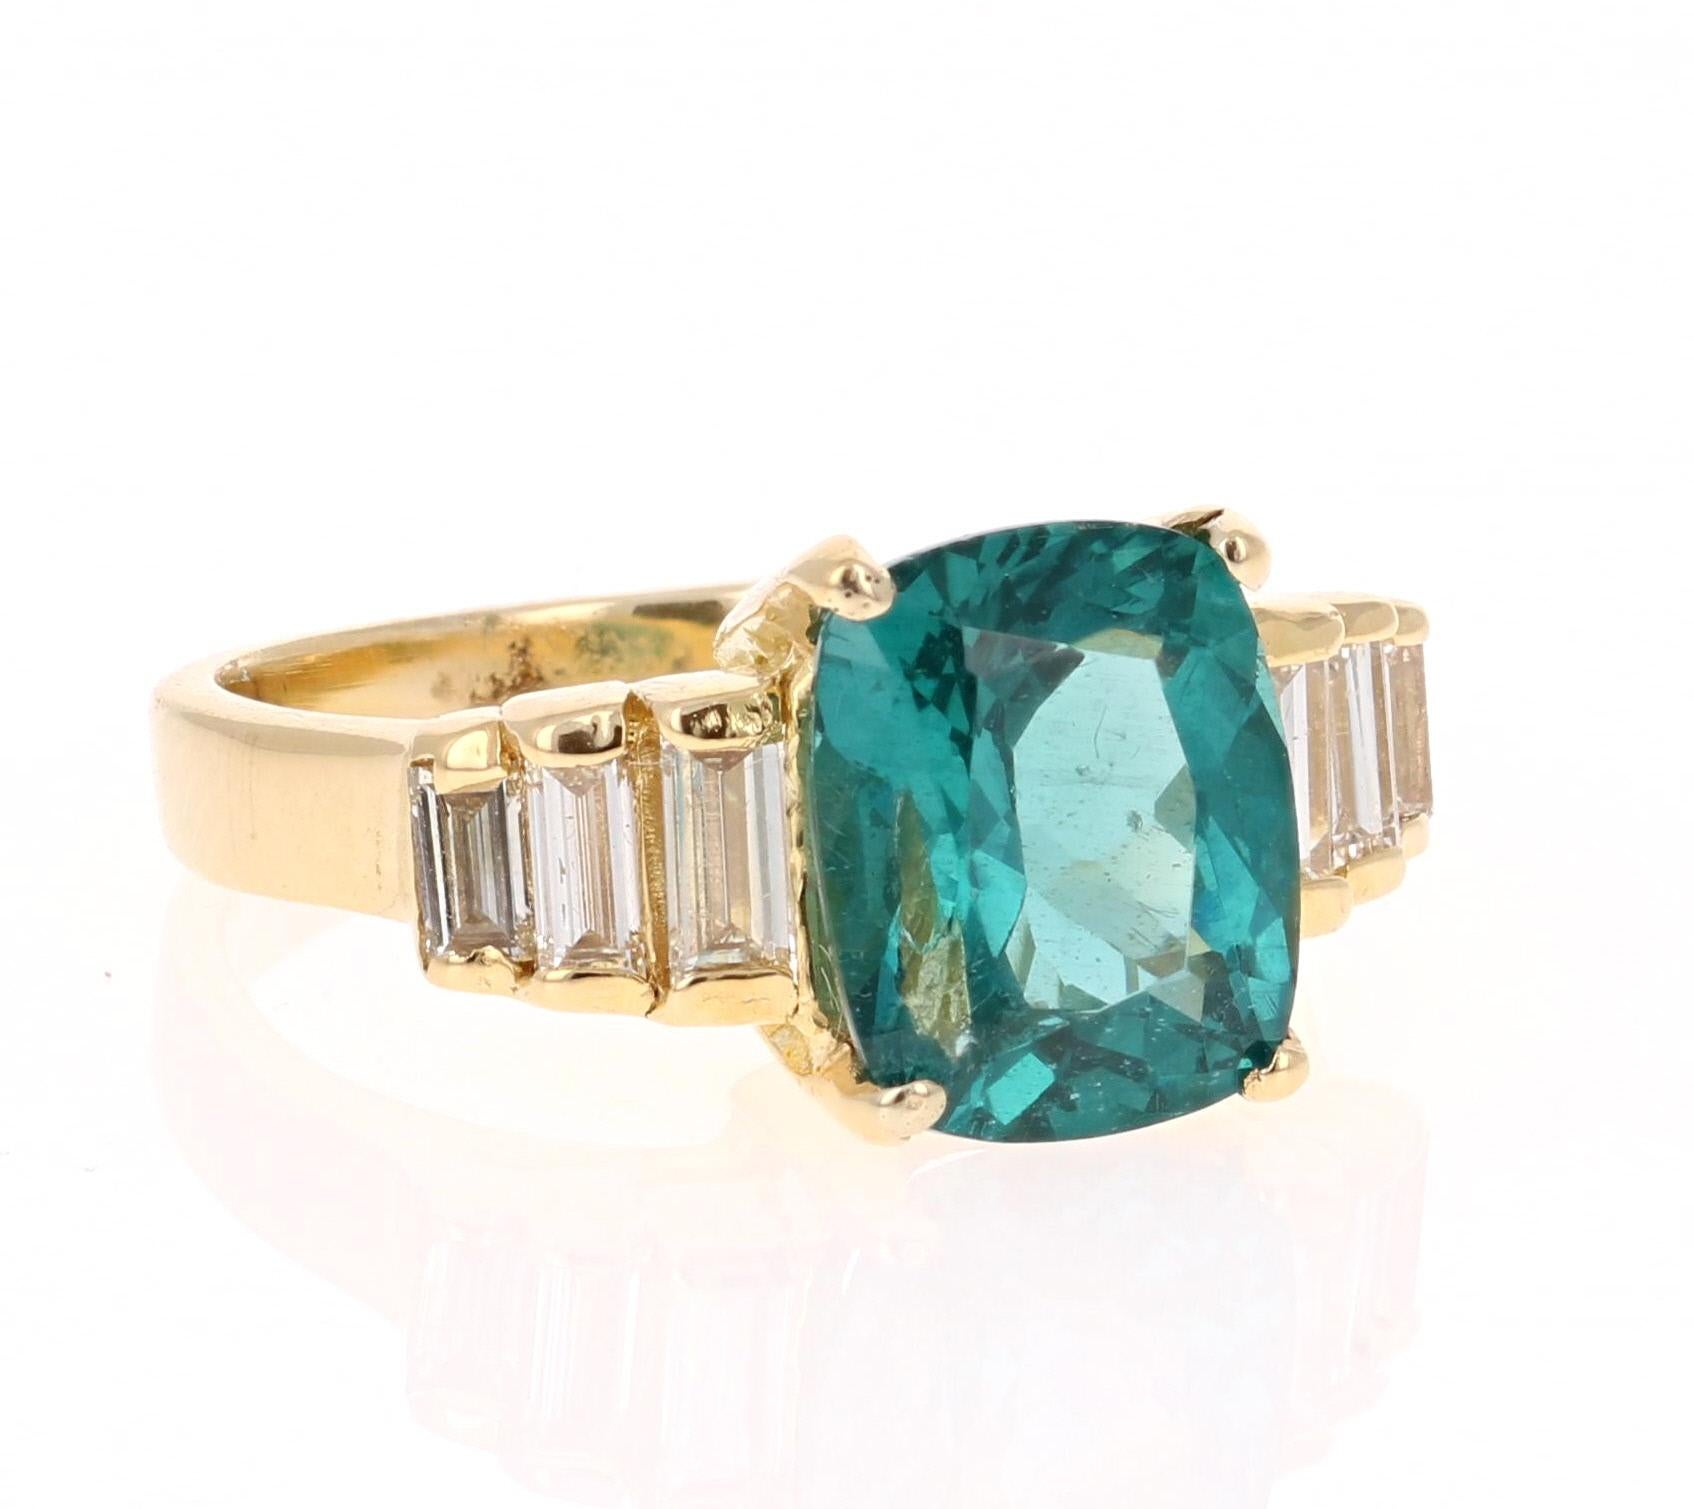 Classic and beautifully designed Apatite and Diamond Ring! 
This ring has a 3.12 carat Cushion Cut Apatite in the center of the ring and is surrounded by 6 Baguette Cut Diamonds that weigh a total of 0.50 carats. The total carat weight of the ring